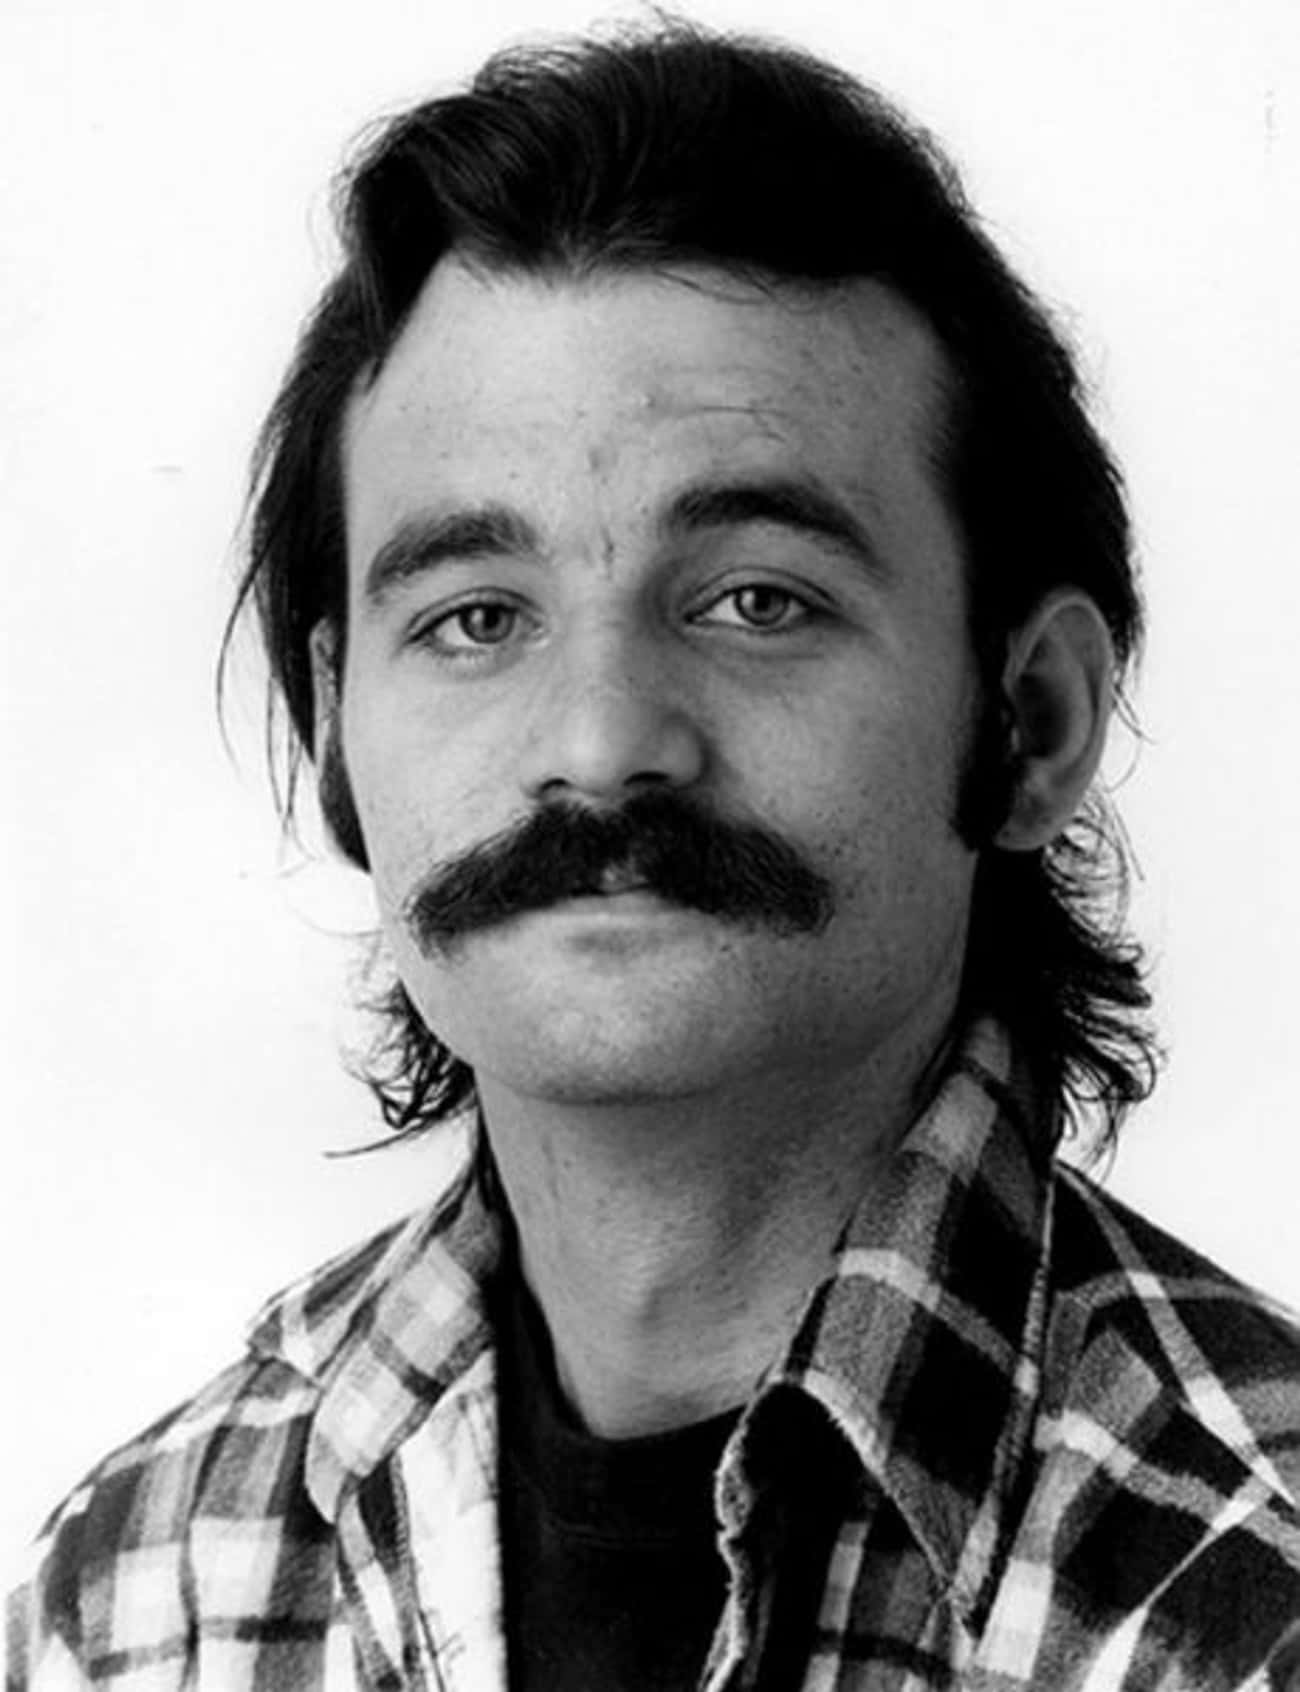 Young Bill Murray in a Plaid Shirt with Mustache